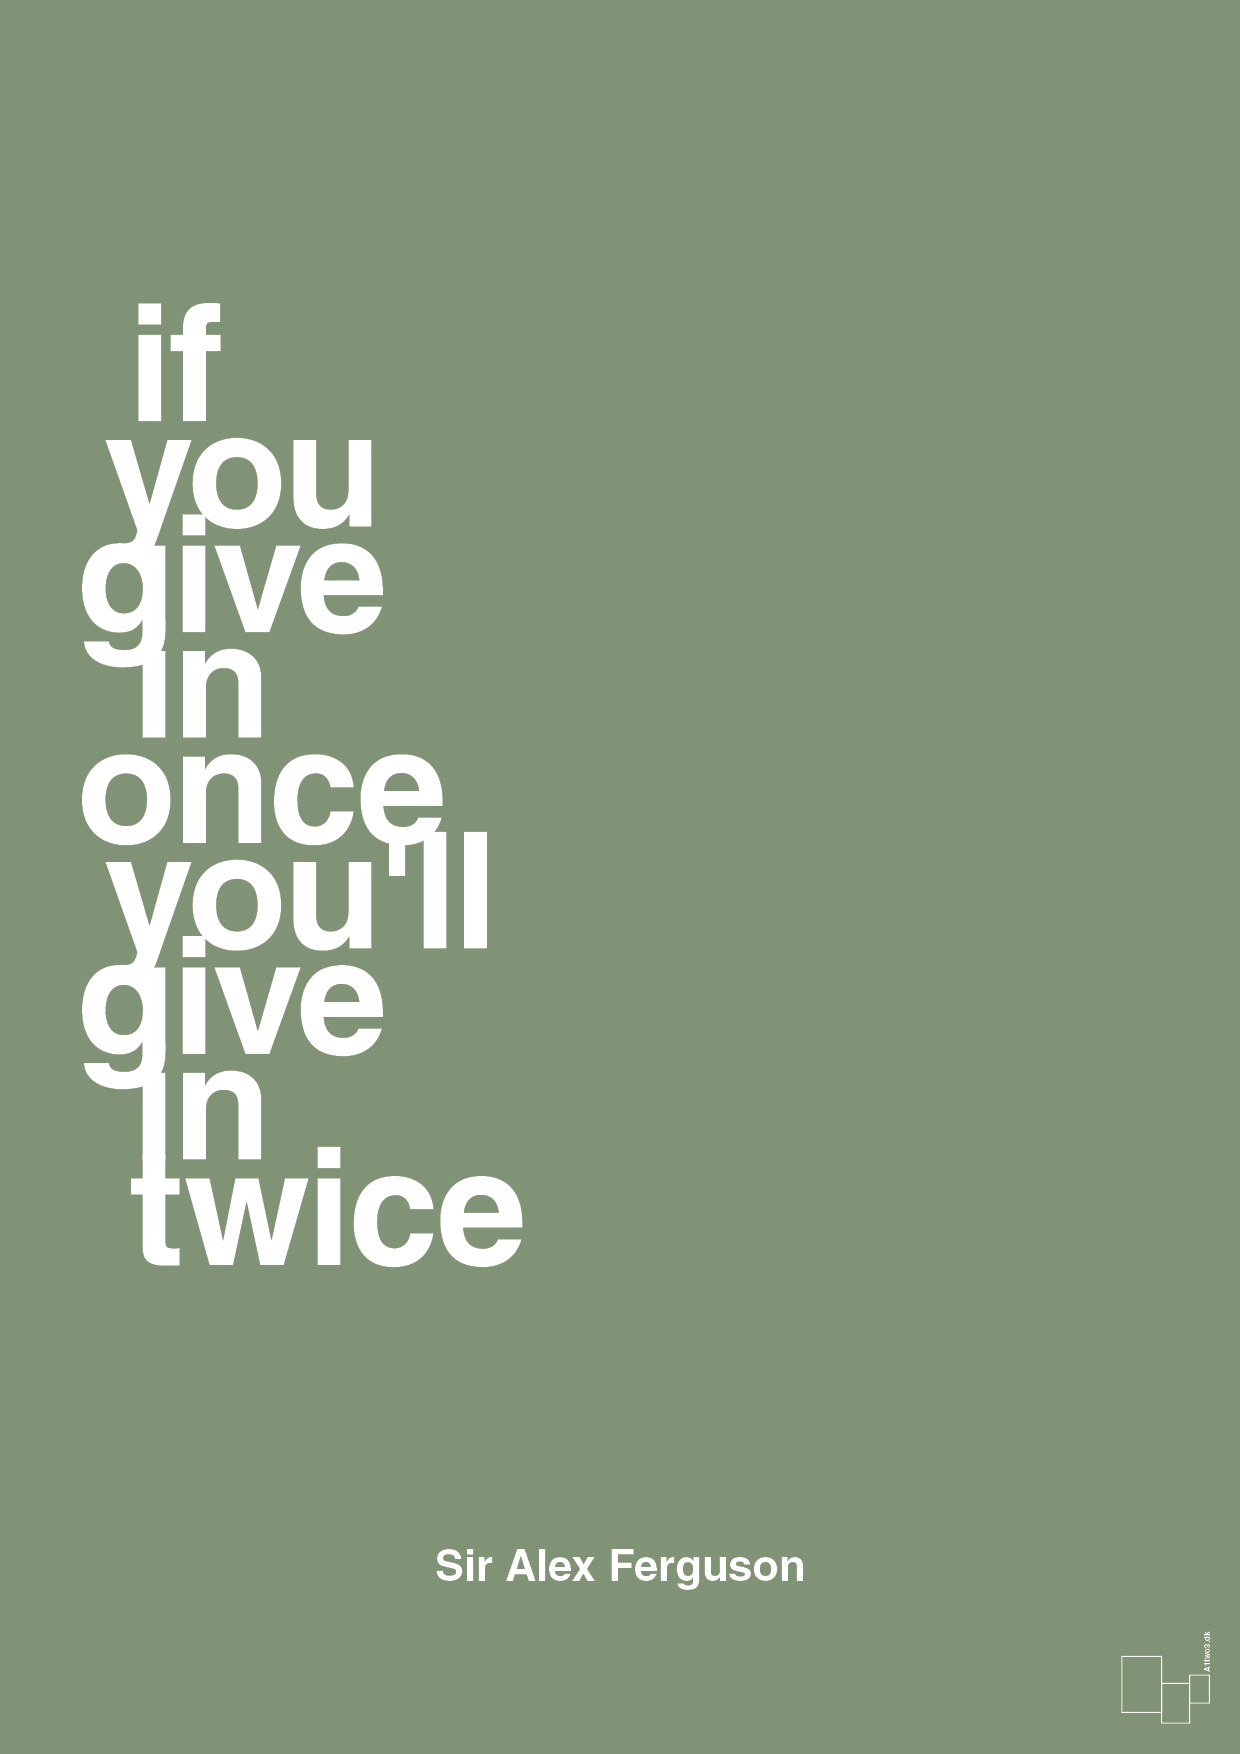 if you give in once you'll give in twice - Plakat med Citater i Jade